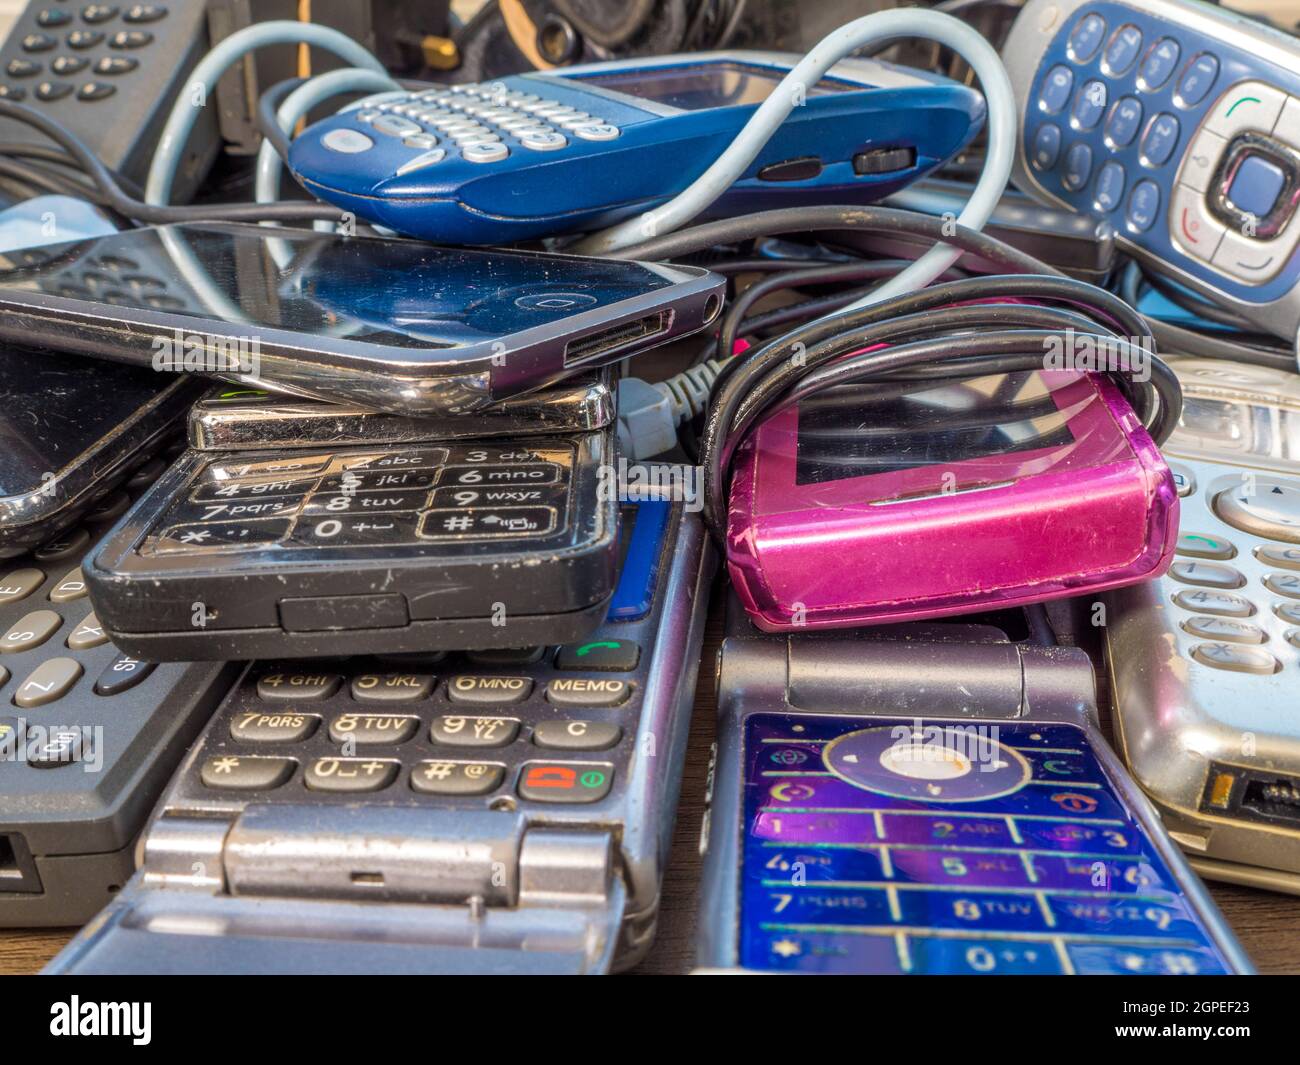 Closeup of a pile of old mobile phones and chargers – old technology ranging from the late 1990s up to the period before the advent of smartphones. Stock Photo